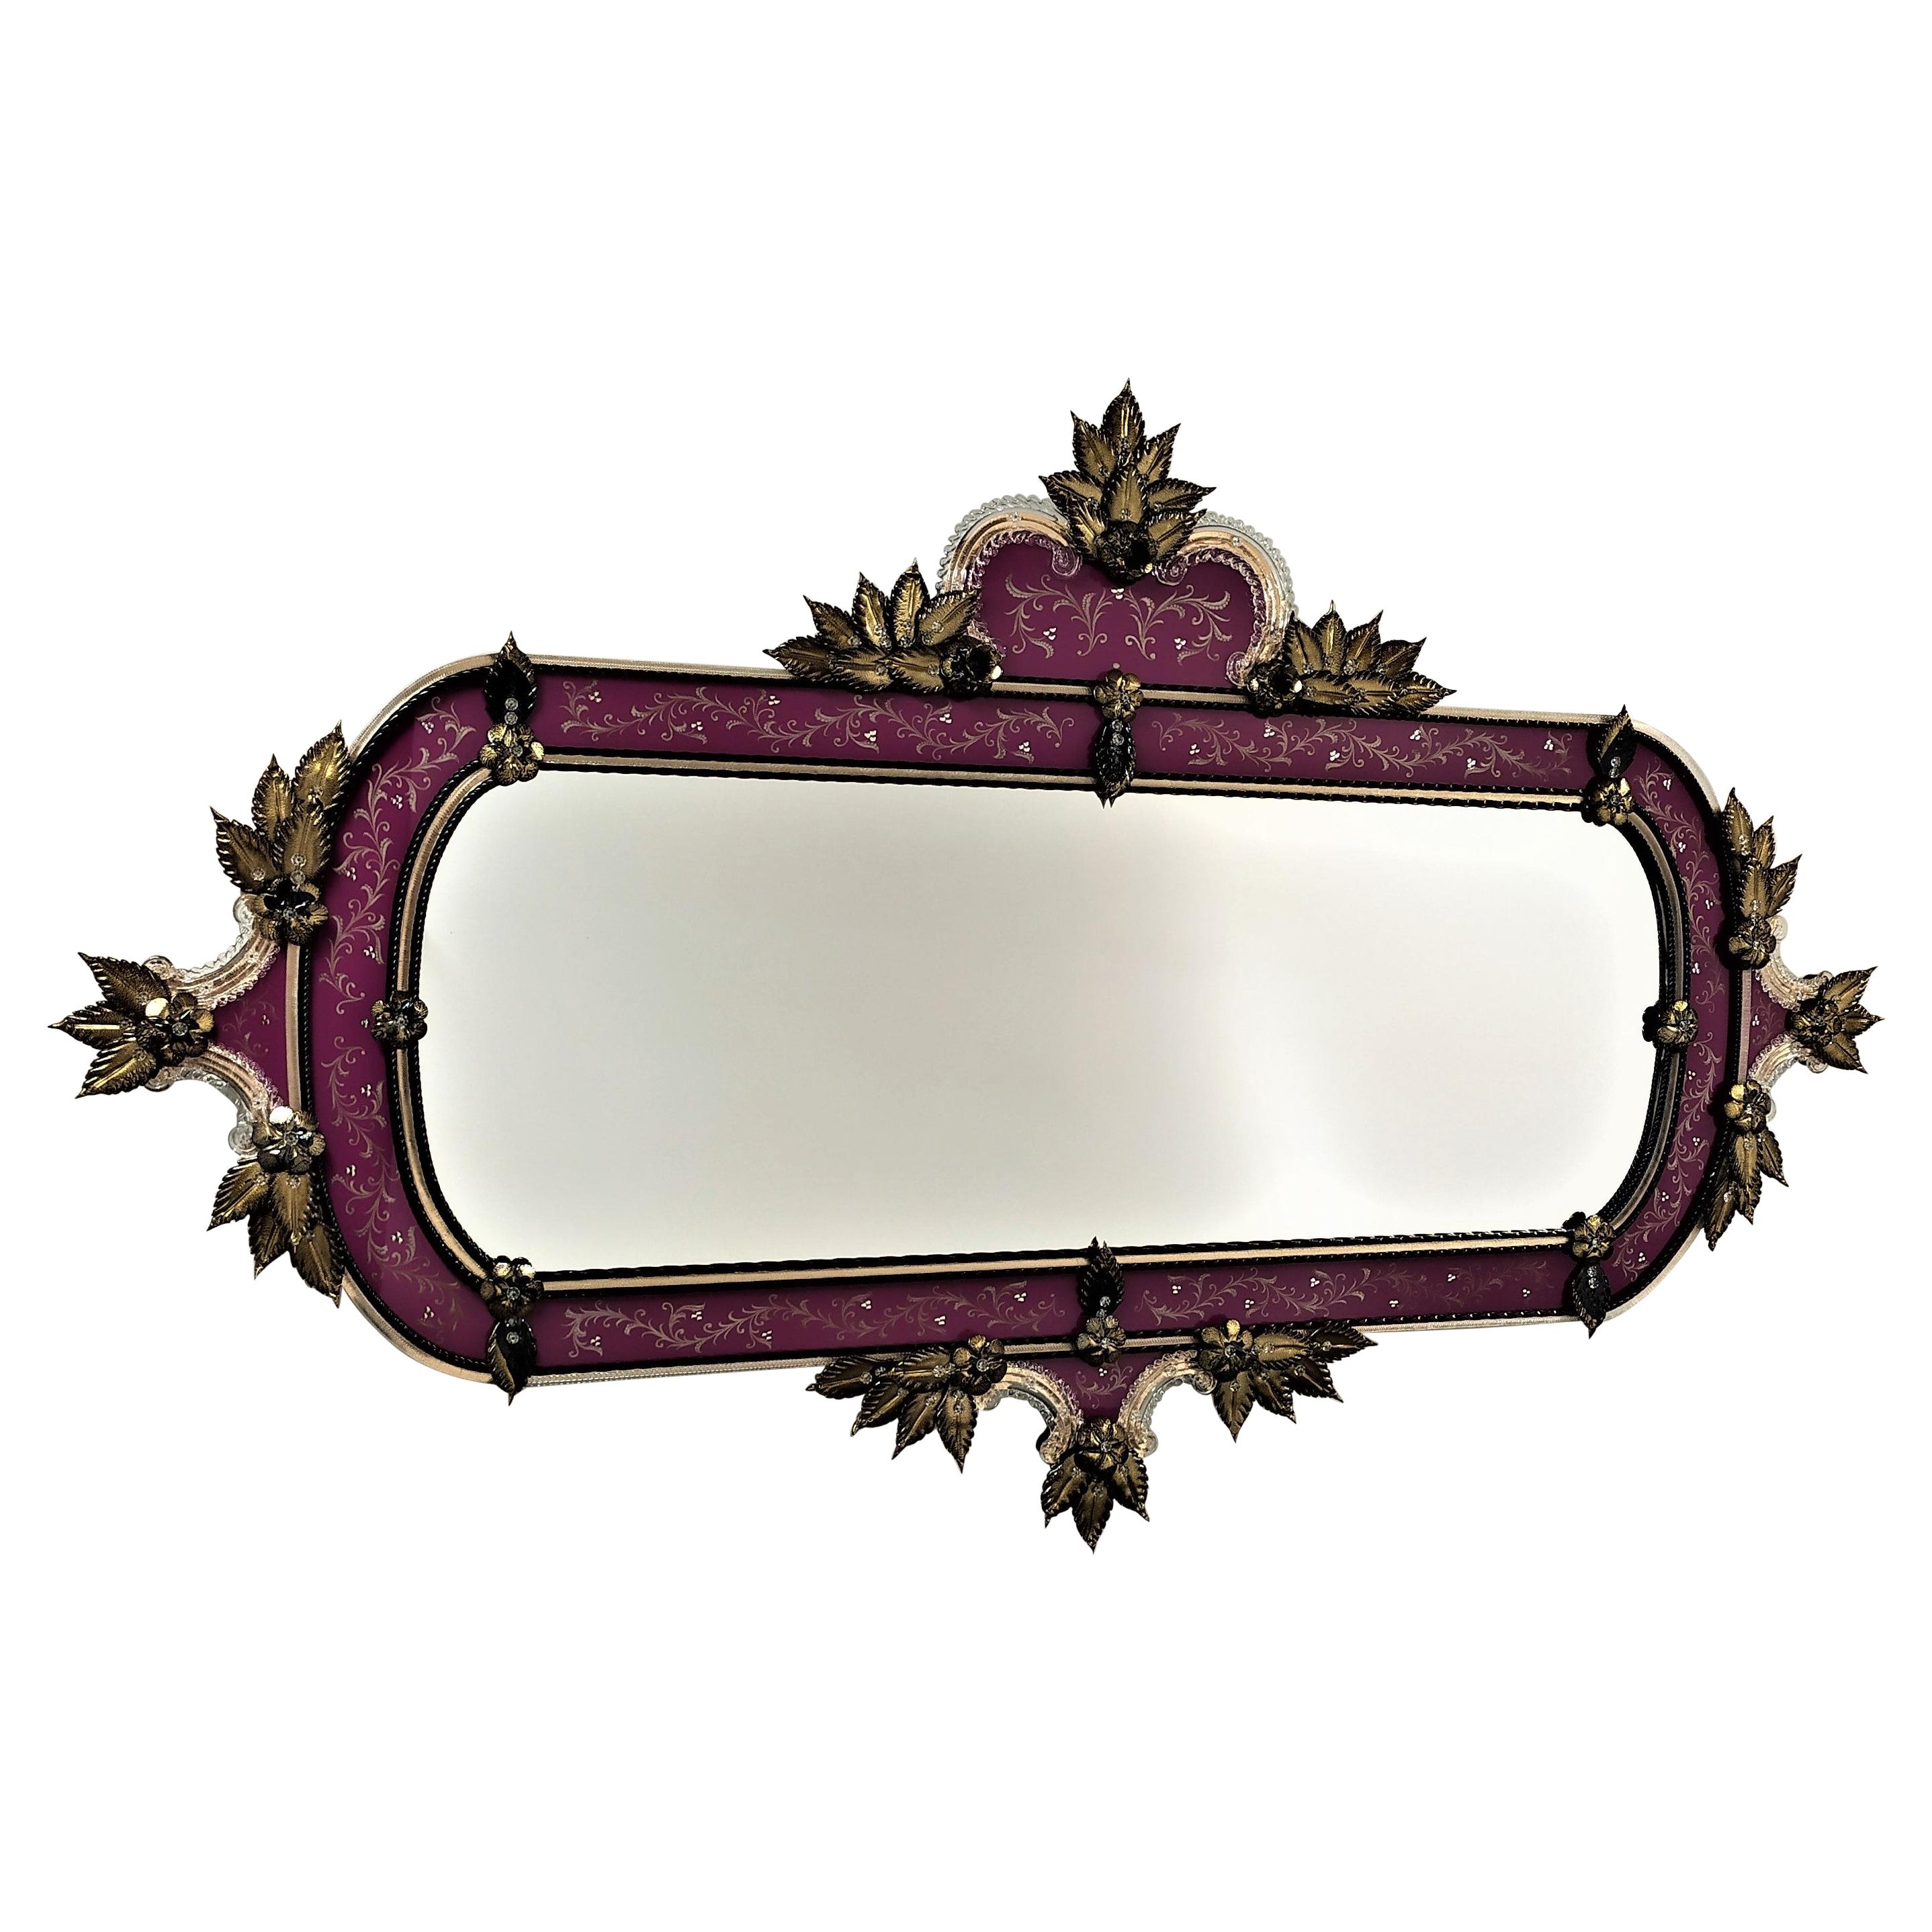 Murano Glass Mirror in Venetian Style, in Black/Gold Leaves and Purple Frame